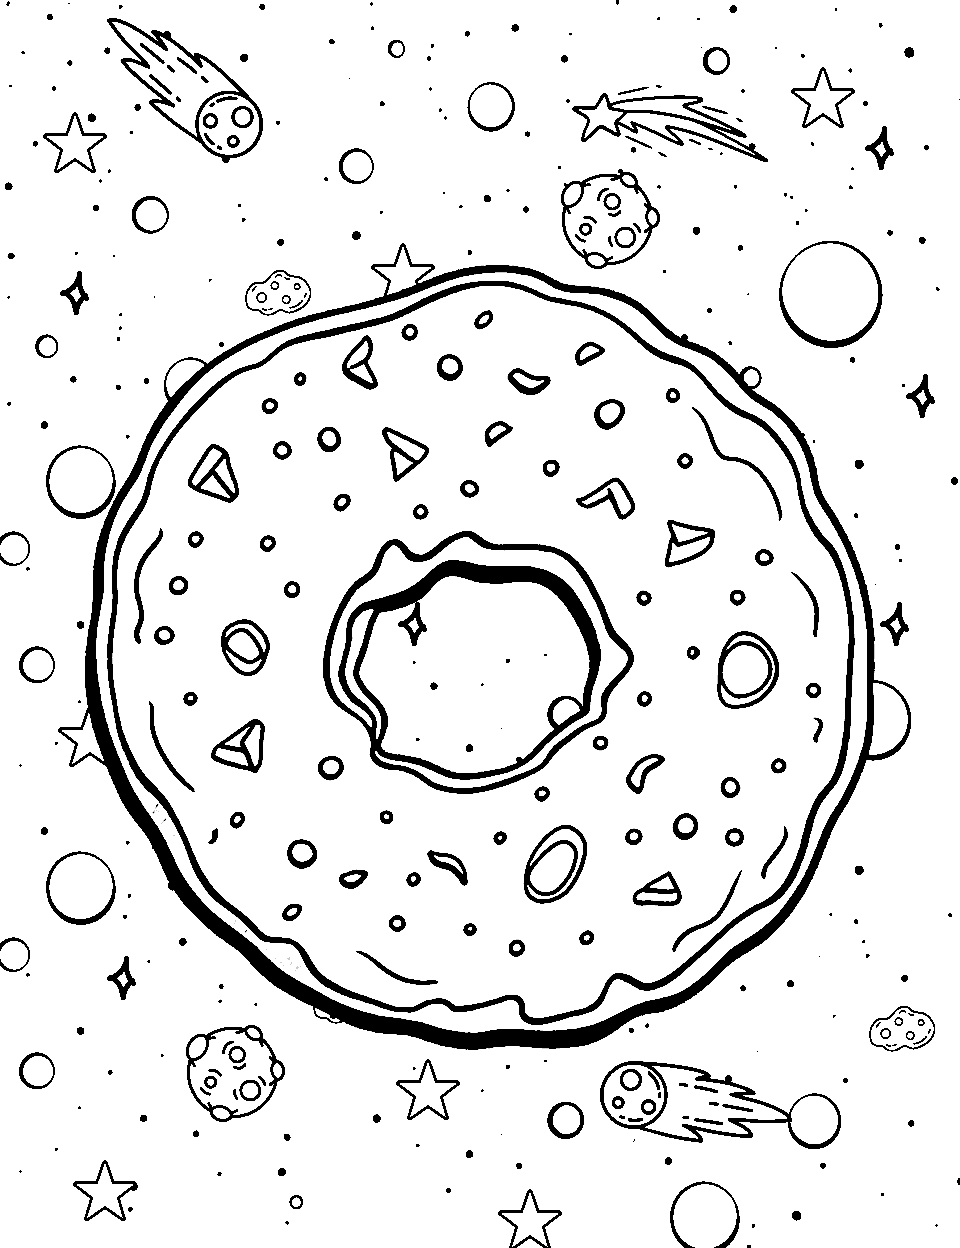 Space-Themed Donut Galaxy Coloring Page - A big Donut floating in outer space in the middle of galaxies and stars around it.